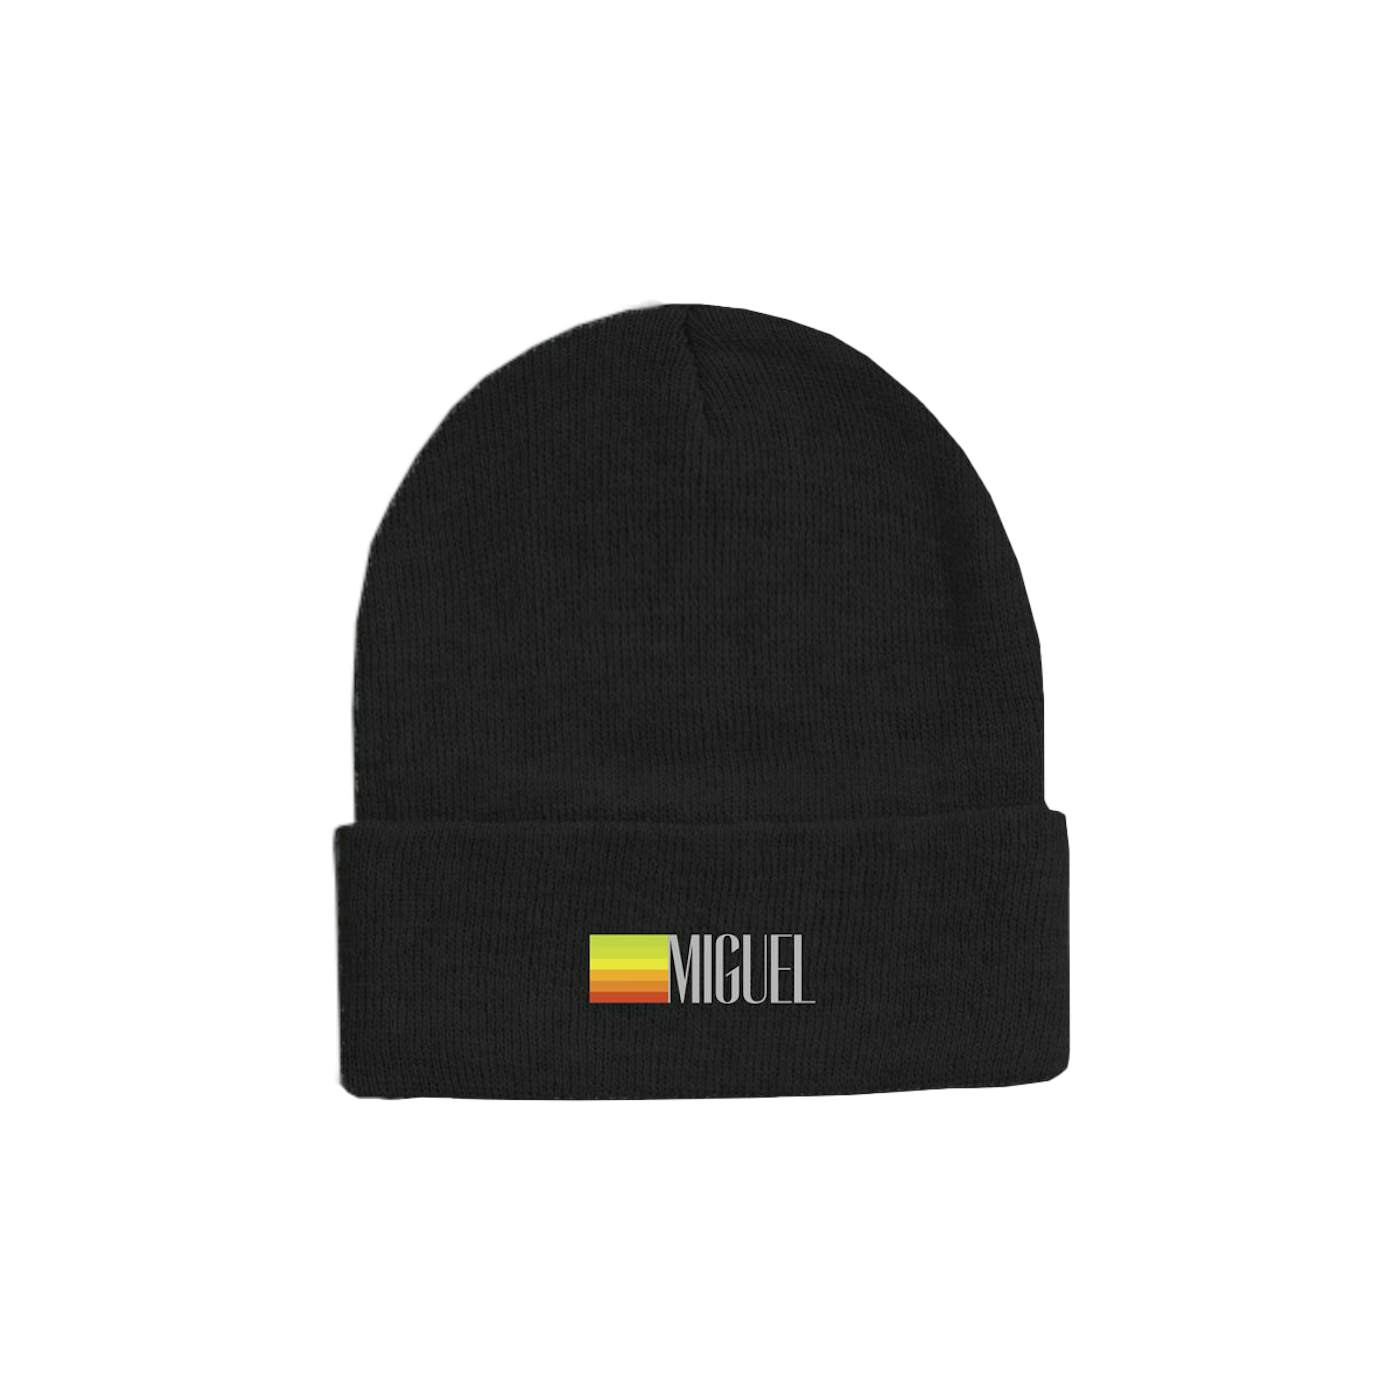 Miguel Ascension Beanie